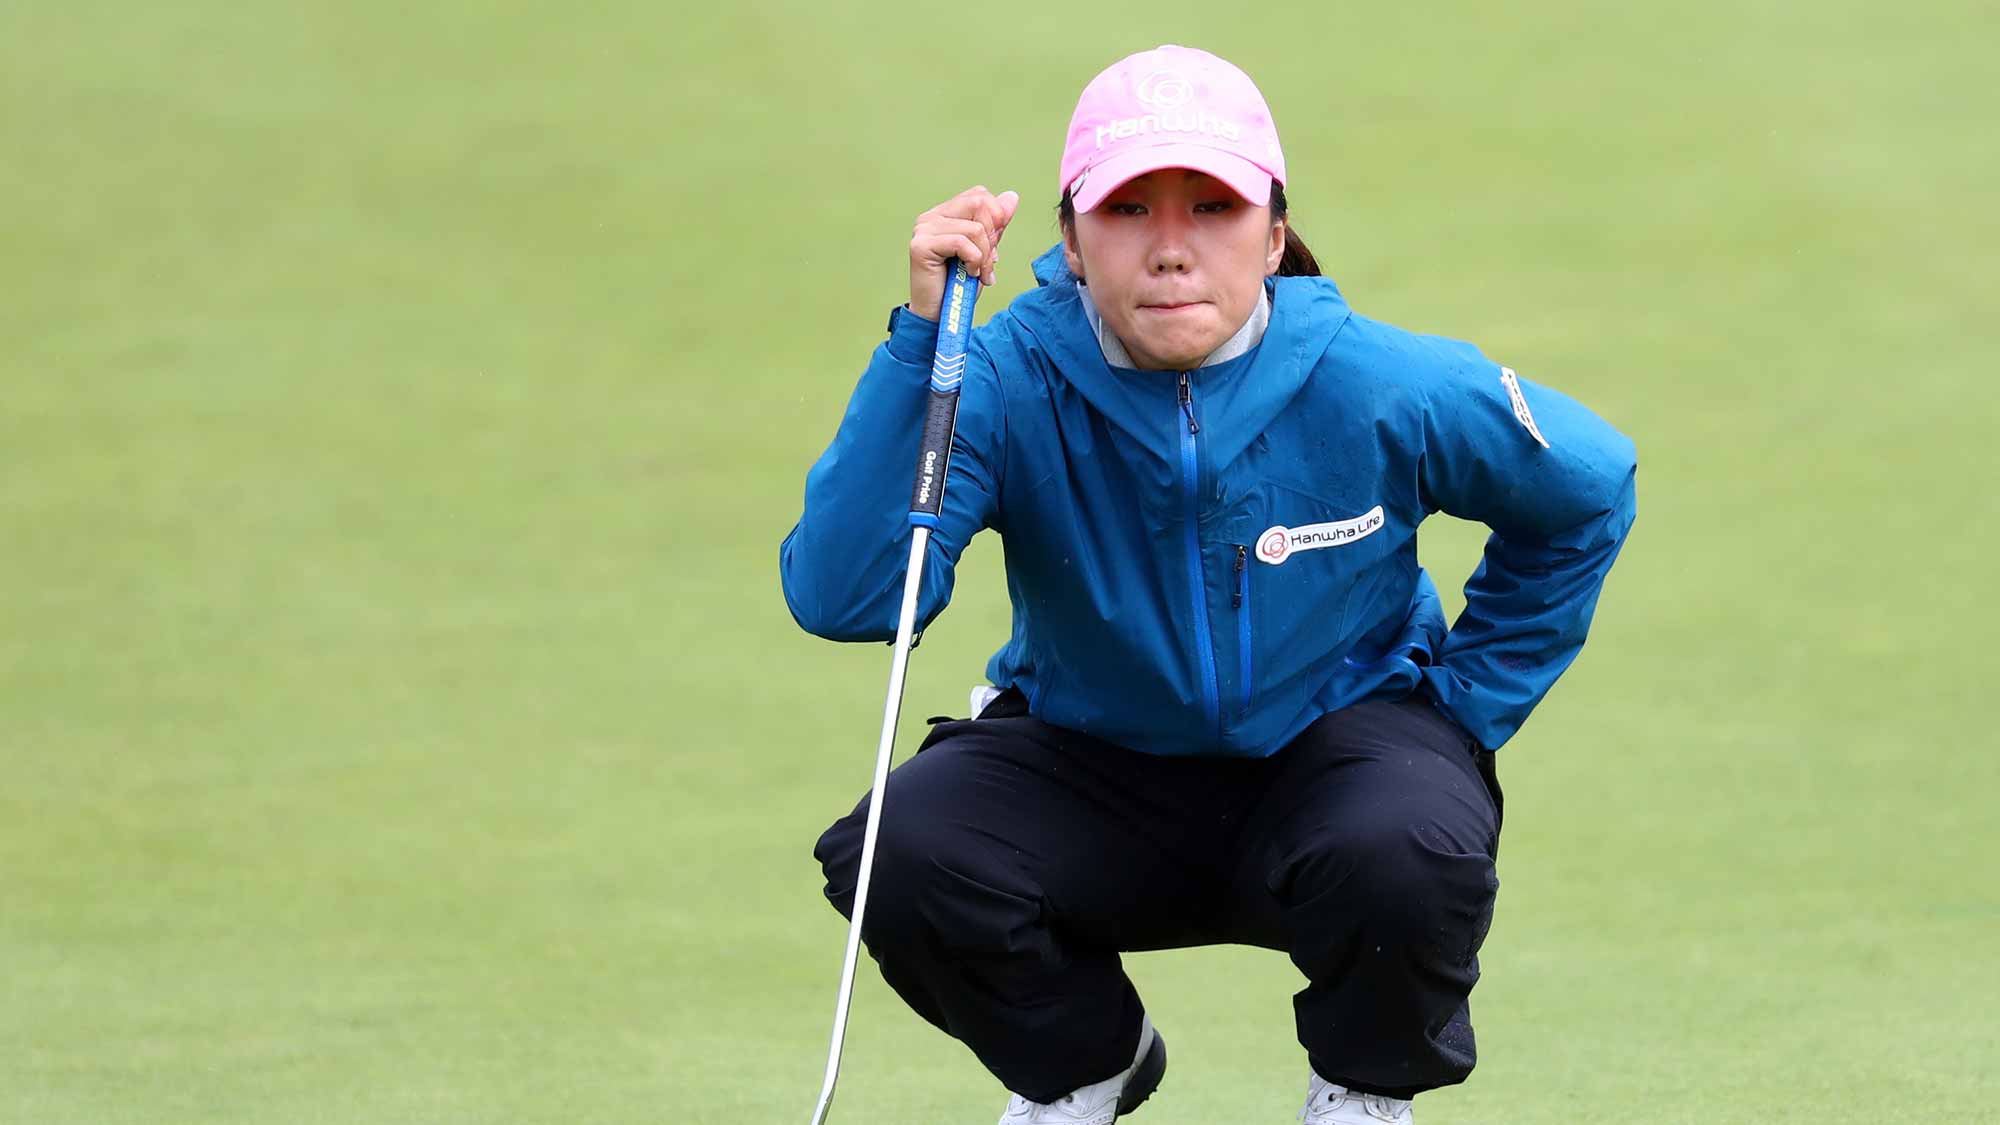 In-Kyung Kim of Korea lines up a putt on the 4th green during the third round of the Ricoh Women's British Open at Kingsbarns Golf Links 